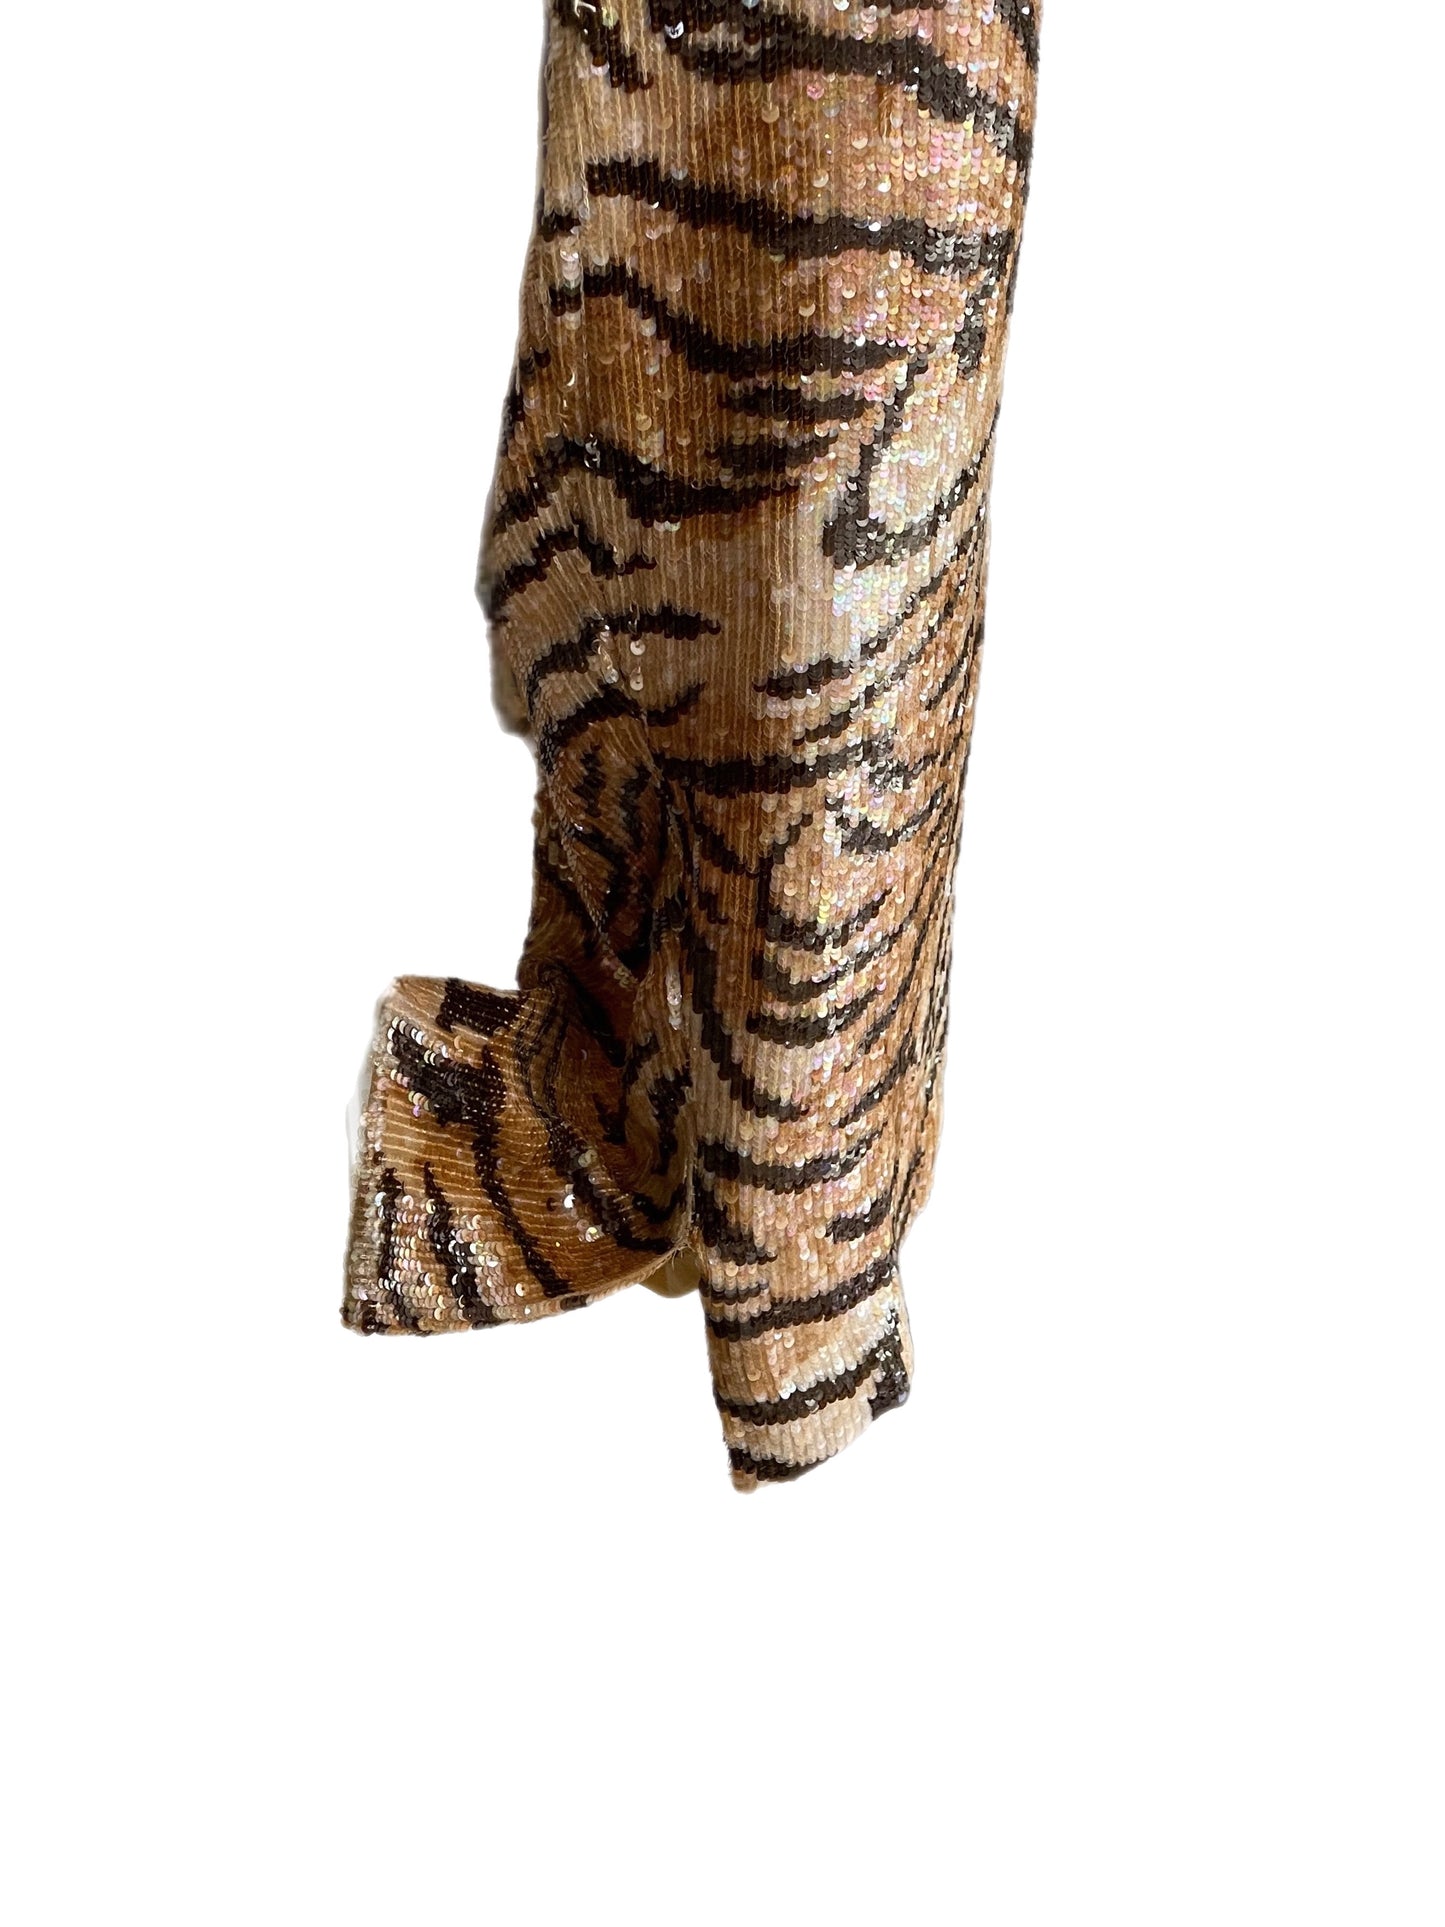 Skirt-Tiger Print Sequined Design-By Escada